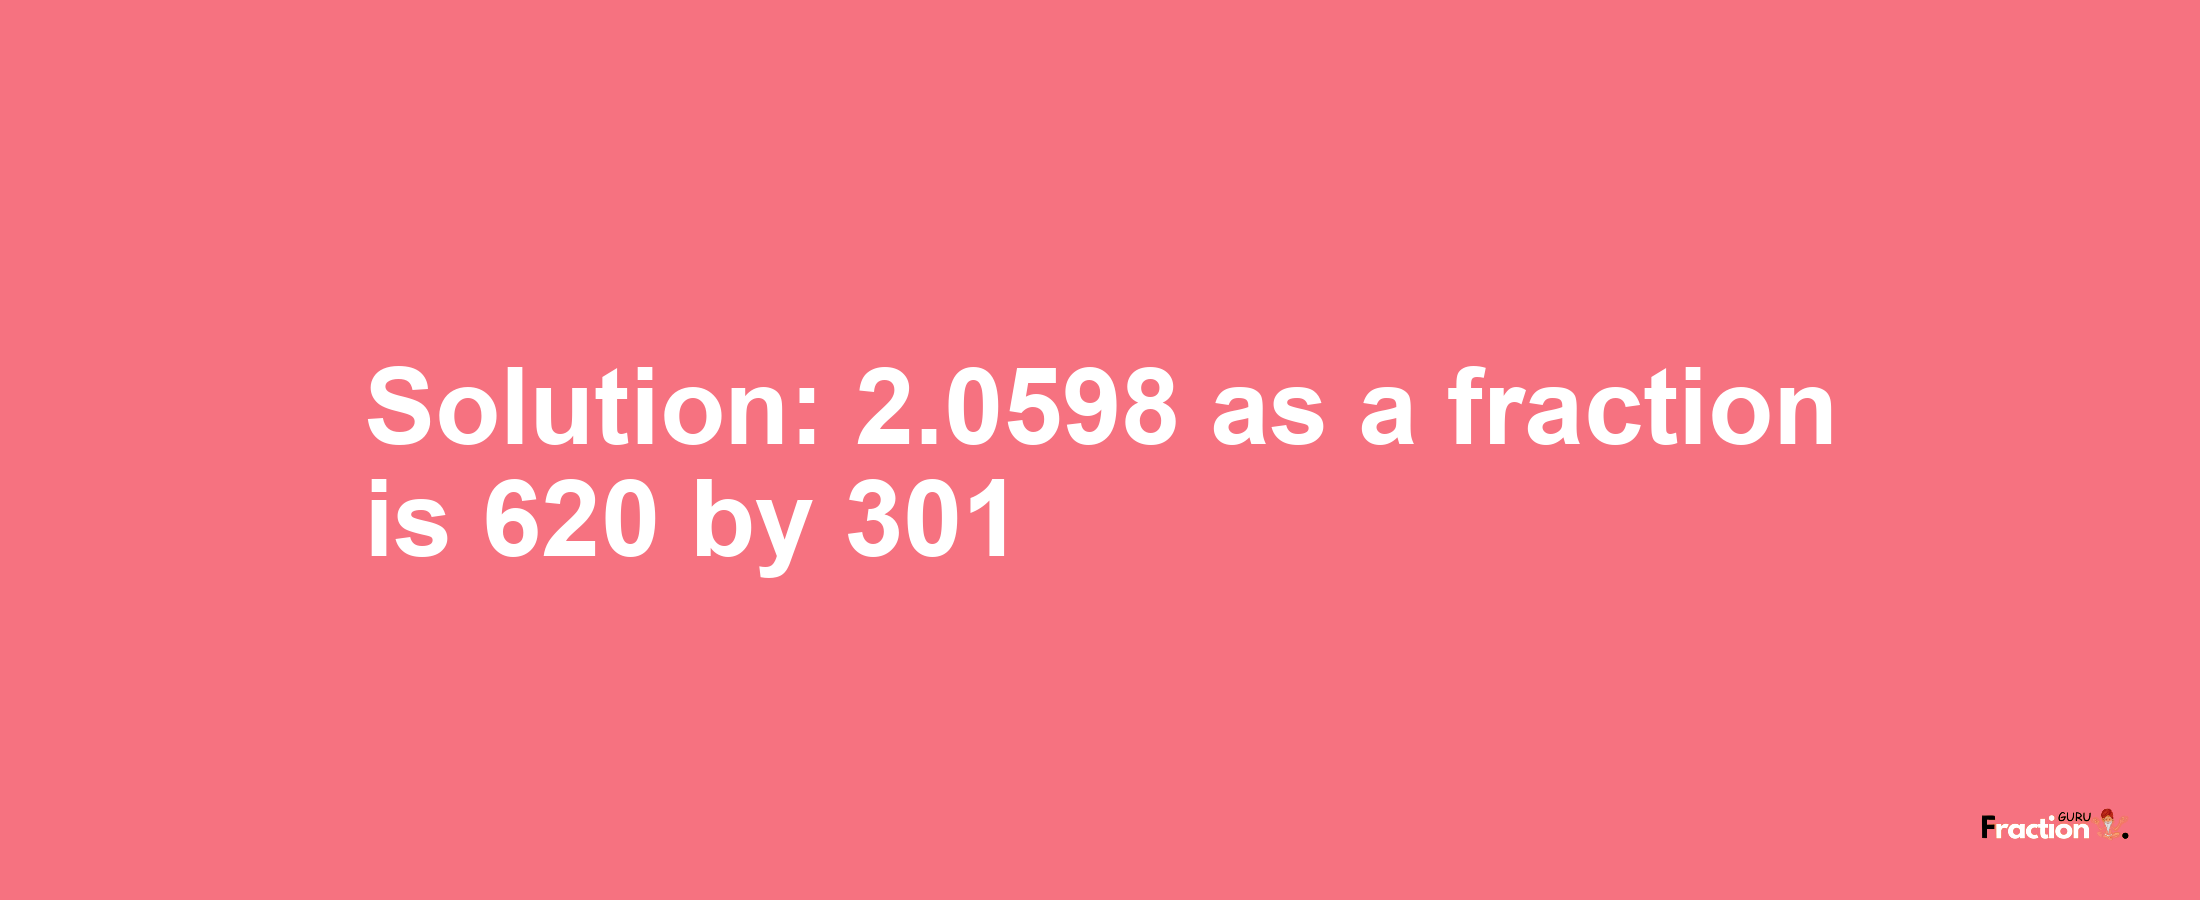 Solution:2.0598 as a fraction is 620/301